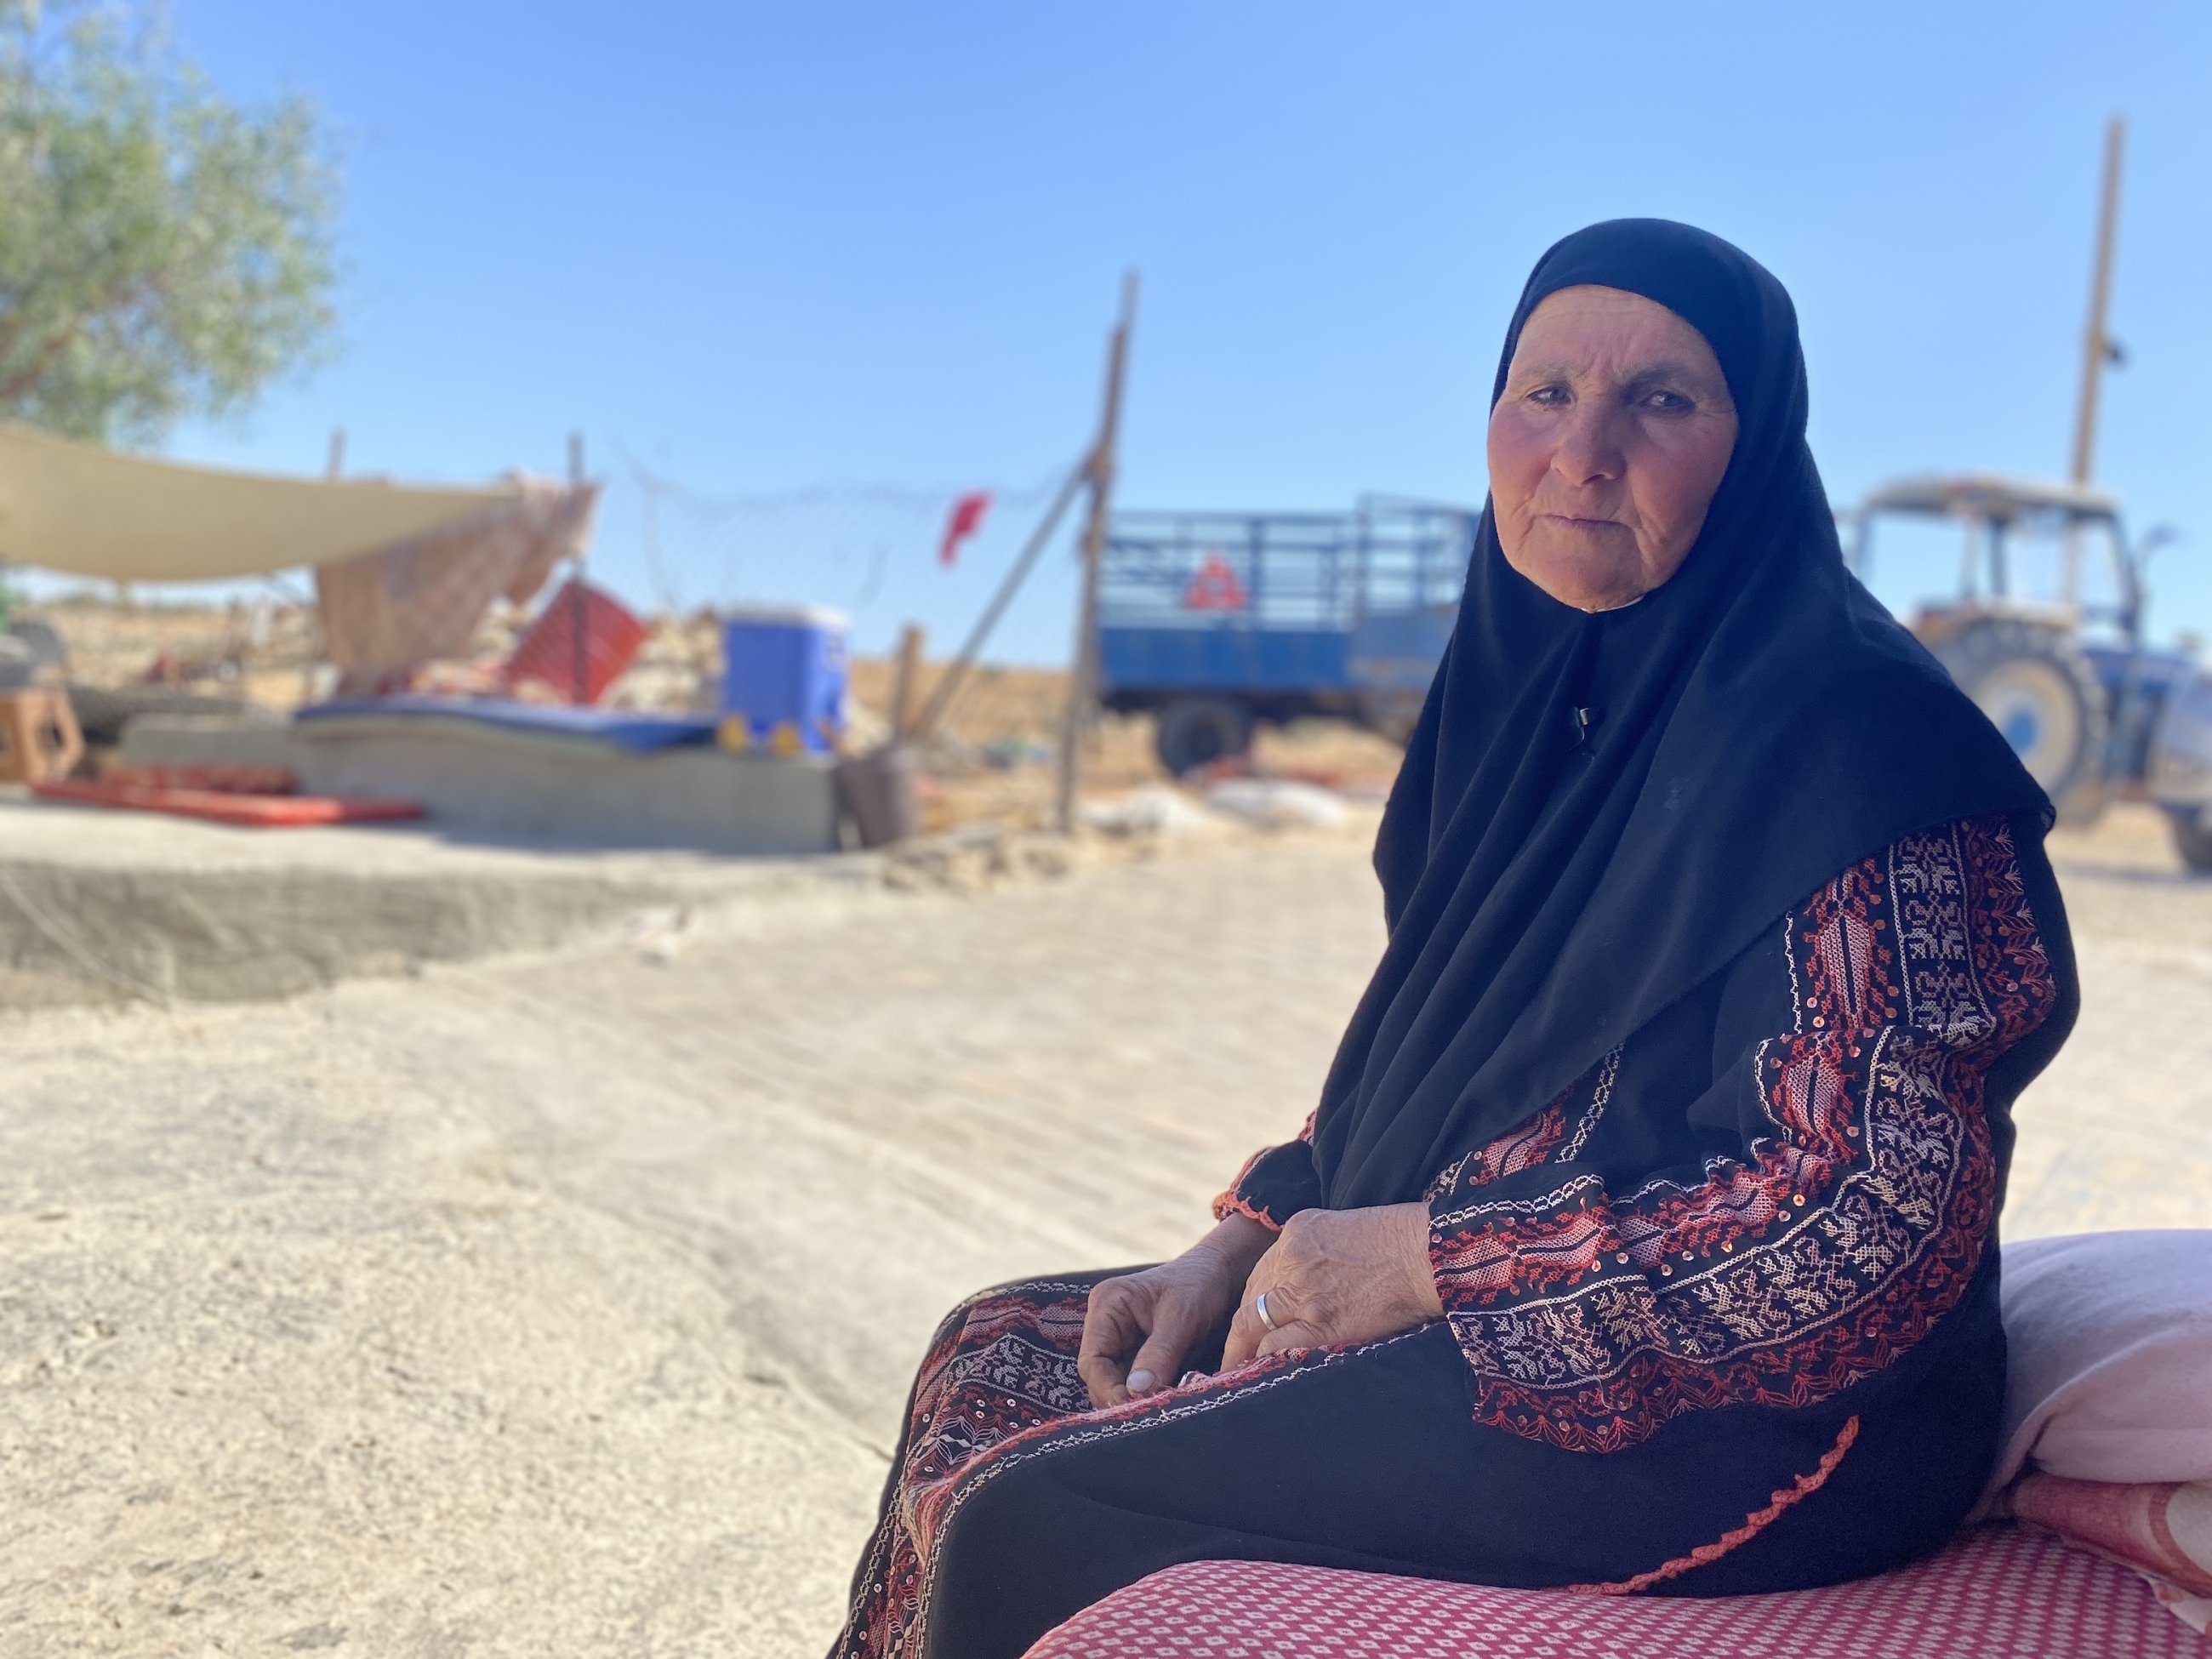 Picture taken on on 19 June 2022 of Jamla al-Ribi, 59, one of 2,500 Palestinians in Masafer Yatta south of the Israeli-occupied West Bank facing imminent expulsions. (MEE/Shatha Hammad)